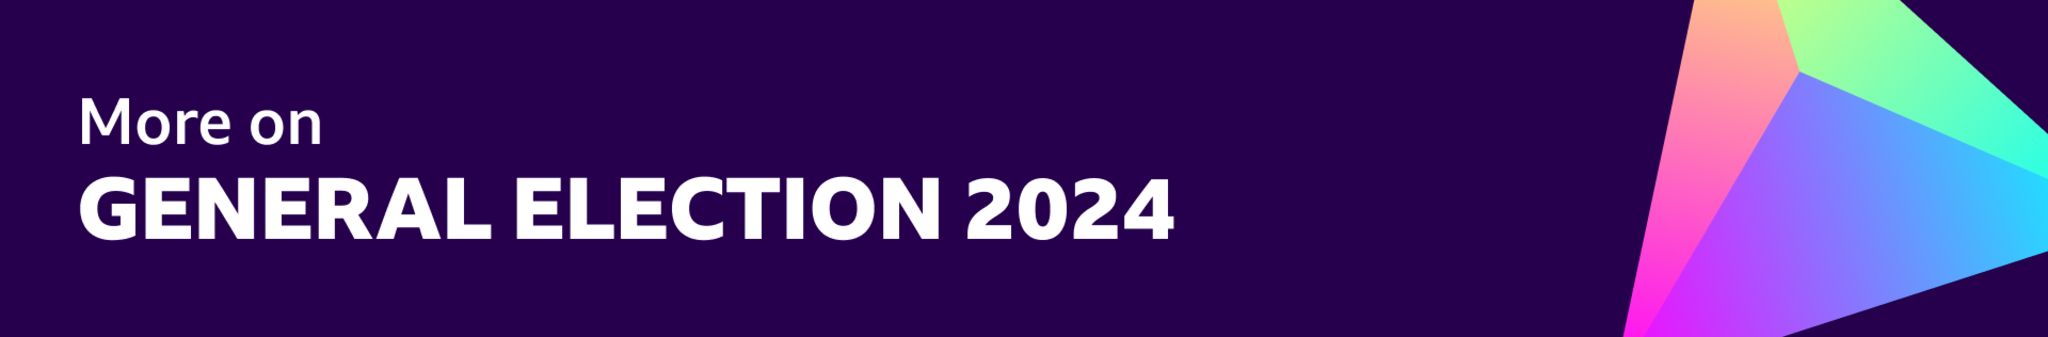 General Election 2024 written in white on a purple background